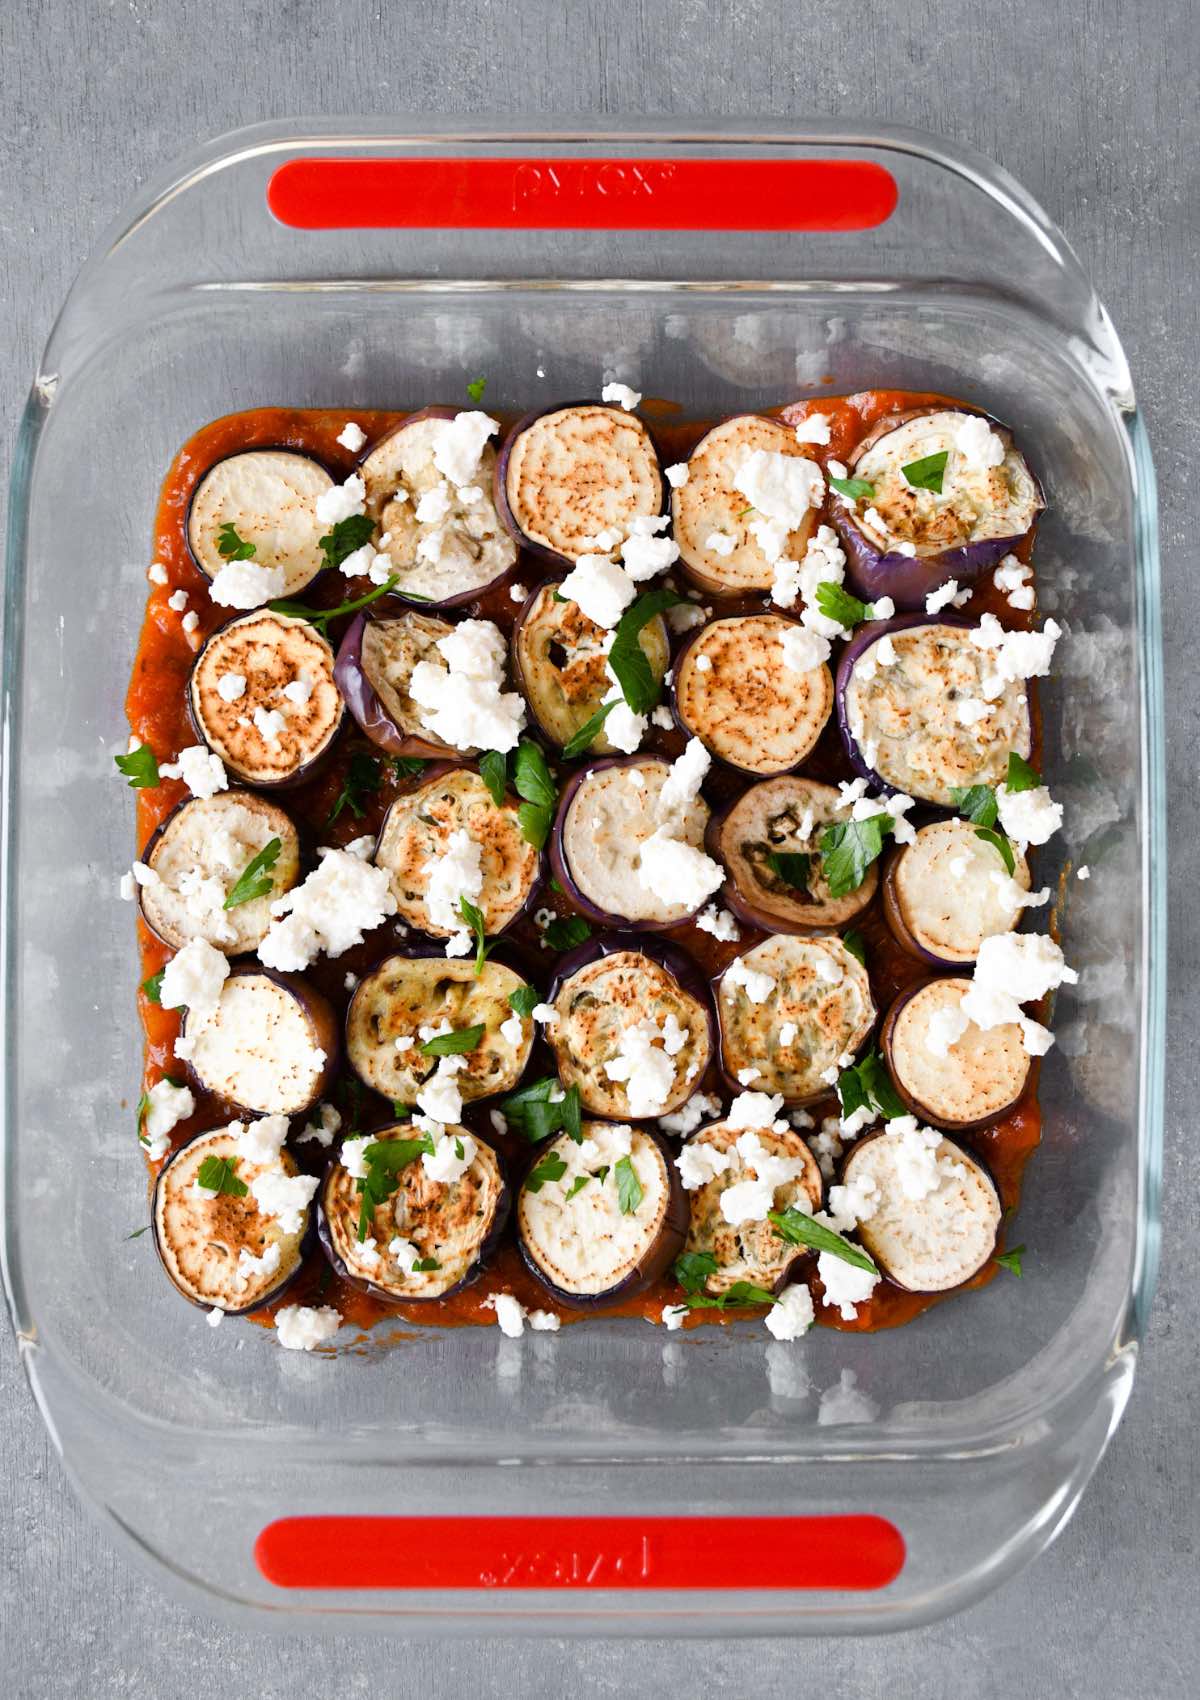 cooked eggplant slices on top of tomato sauce in a baking dish with feta and parsley.